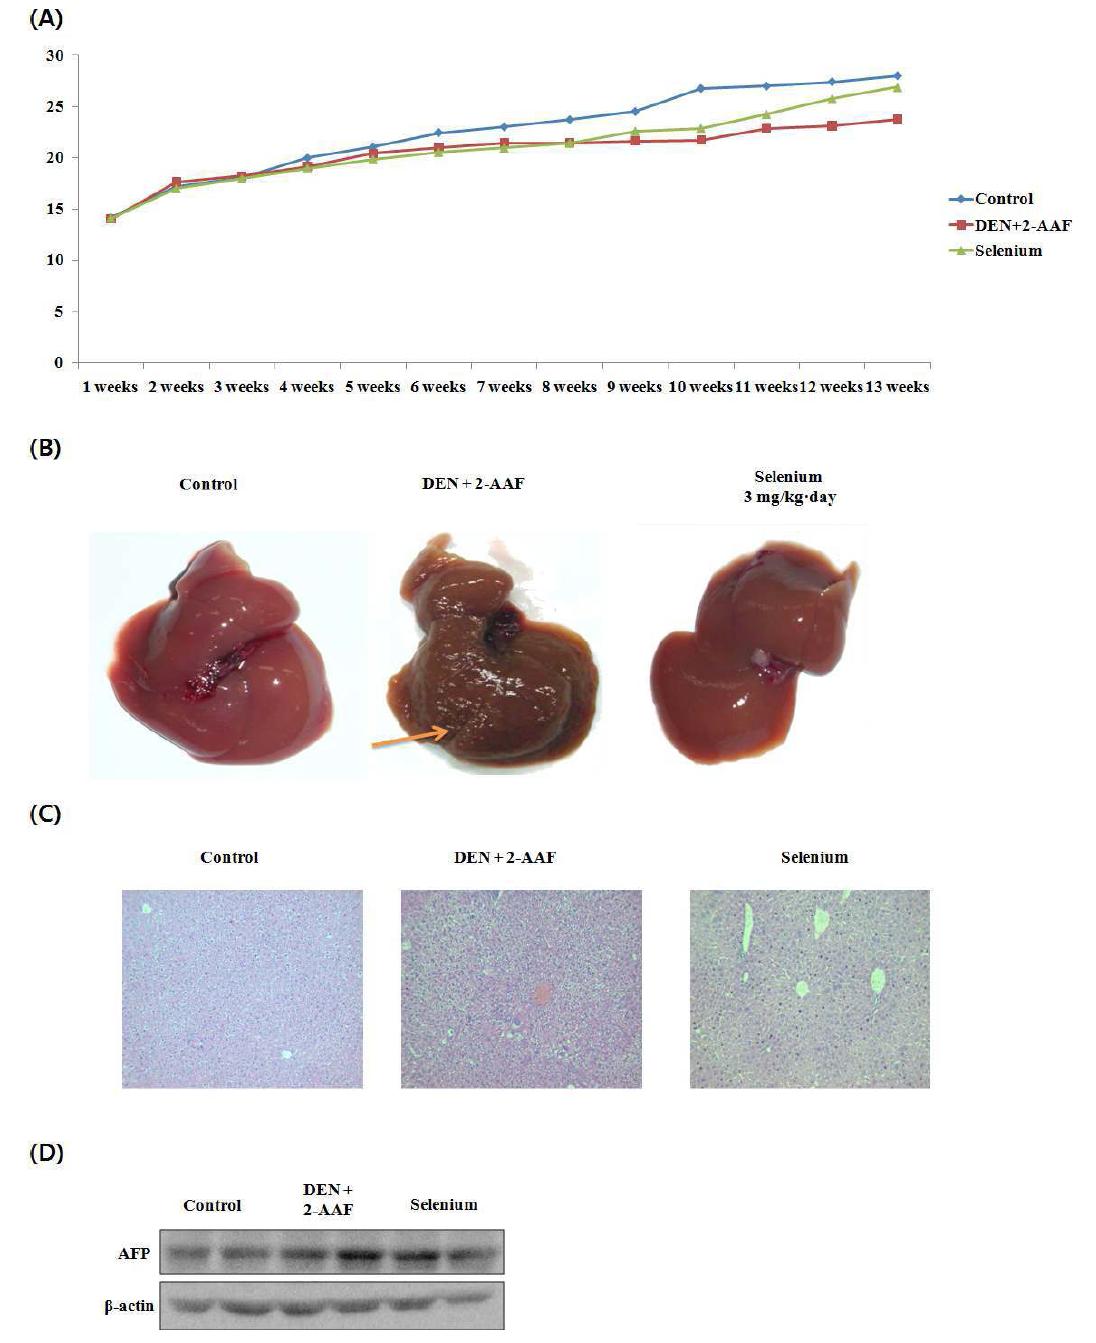 Induction of early carcinogenesis in DEN and 2-AAF treated mouse model